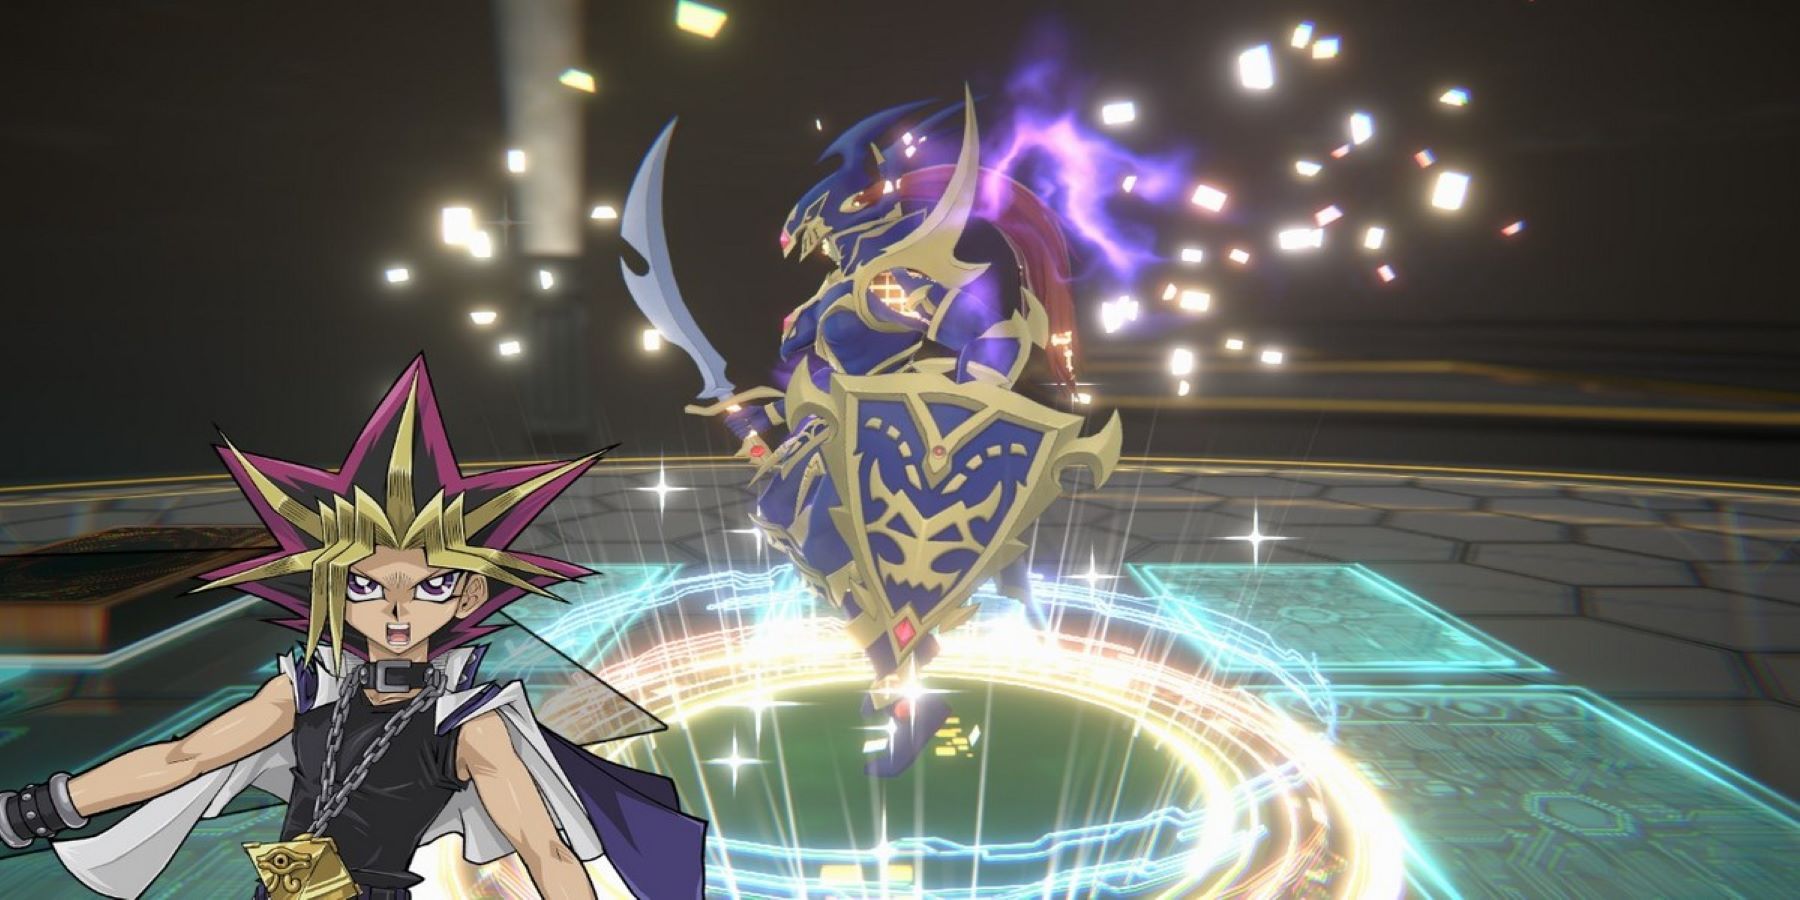 Yu-Gi-Oh! Cross Duel's Four-Player Battles Could Revolutionize the Main Card Game